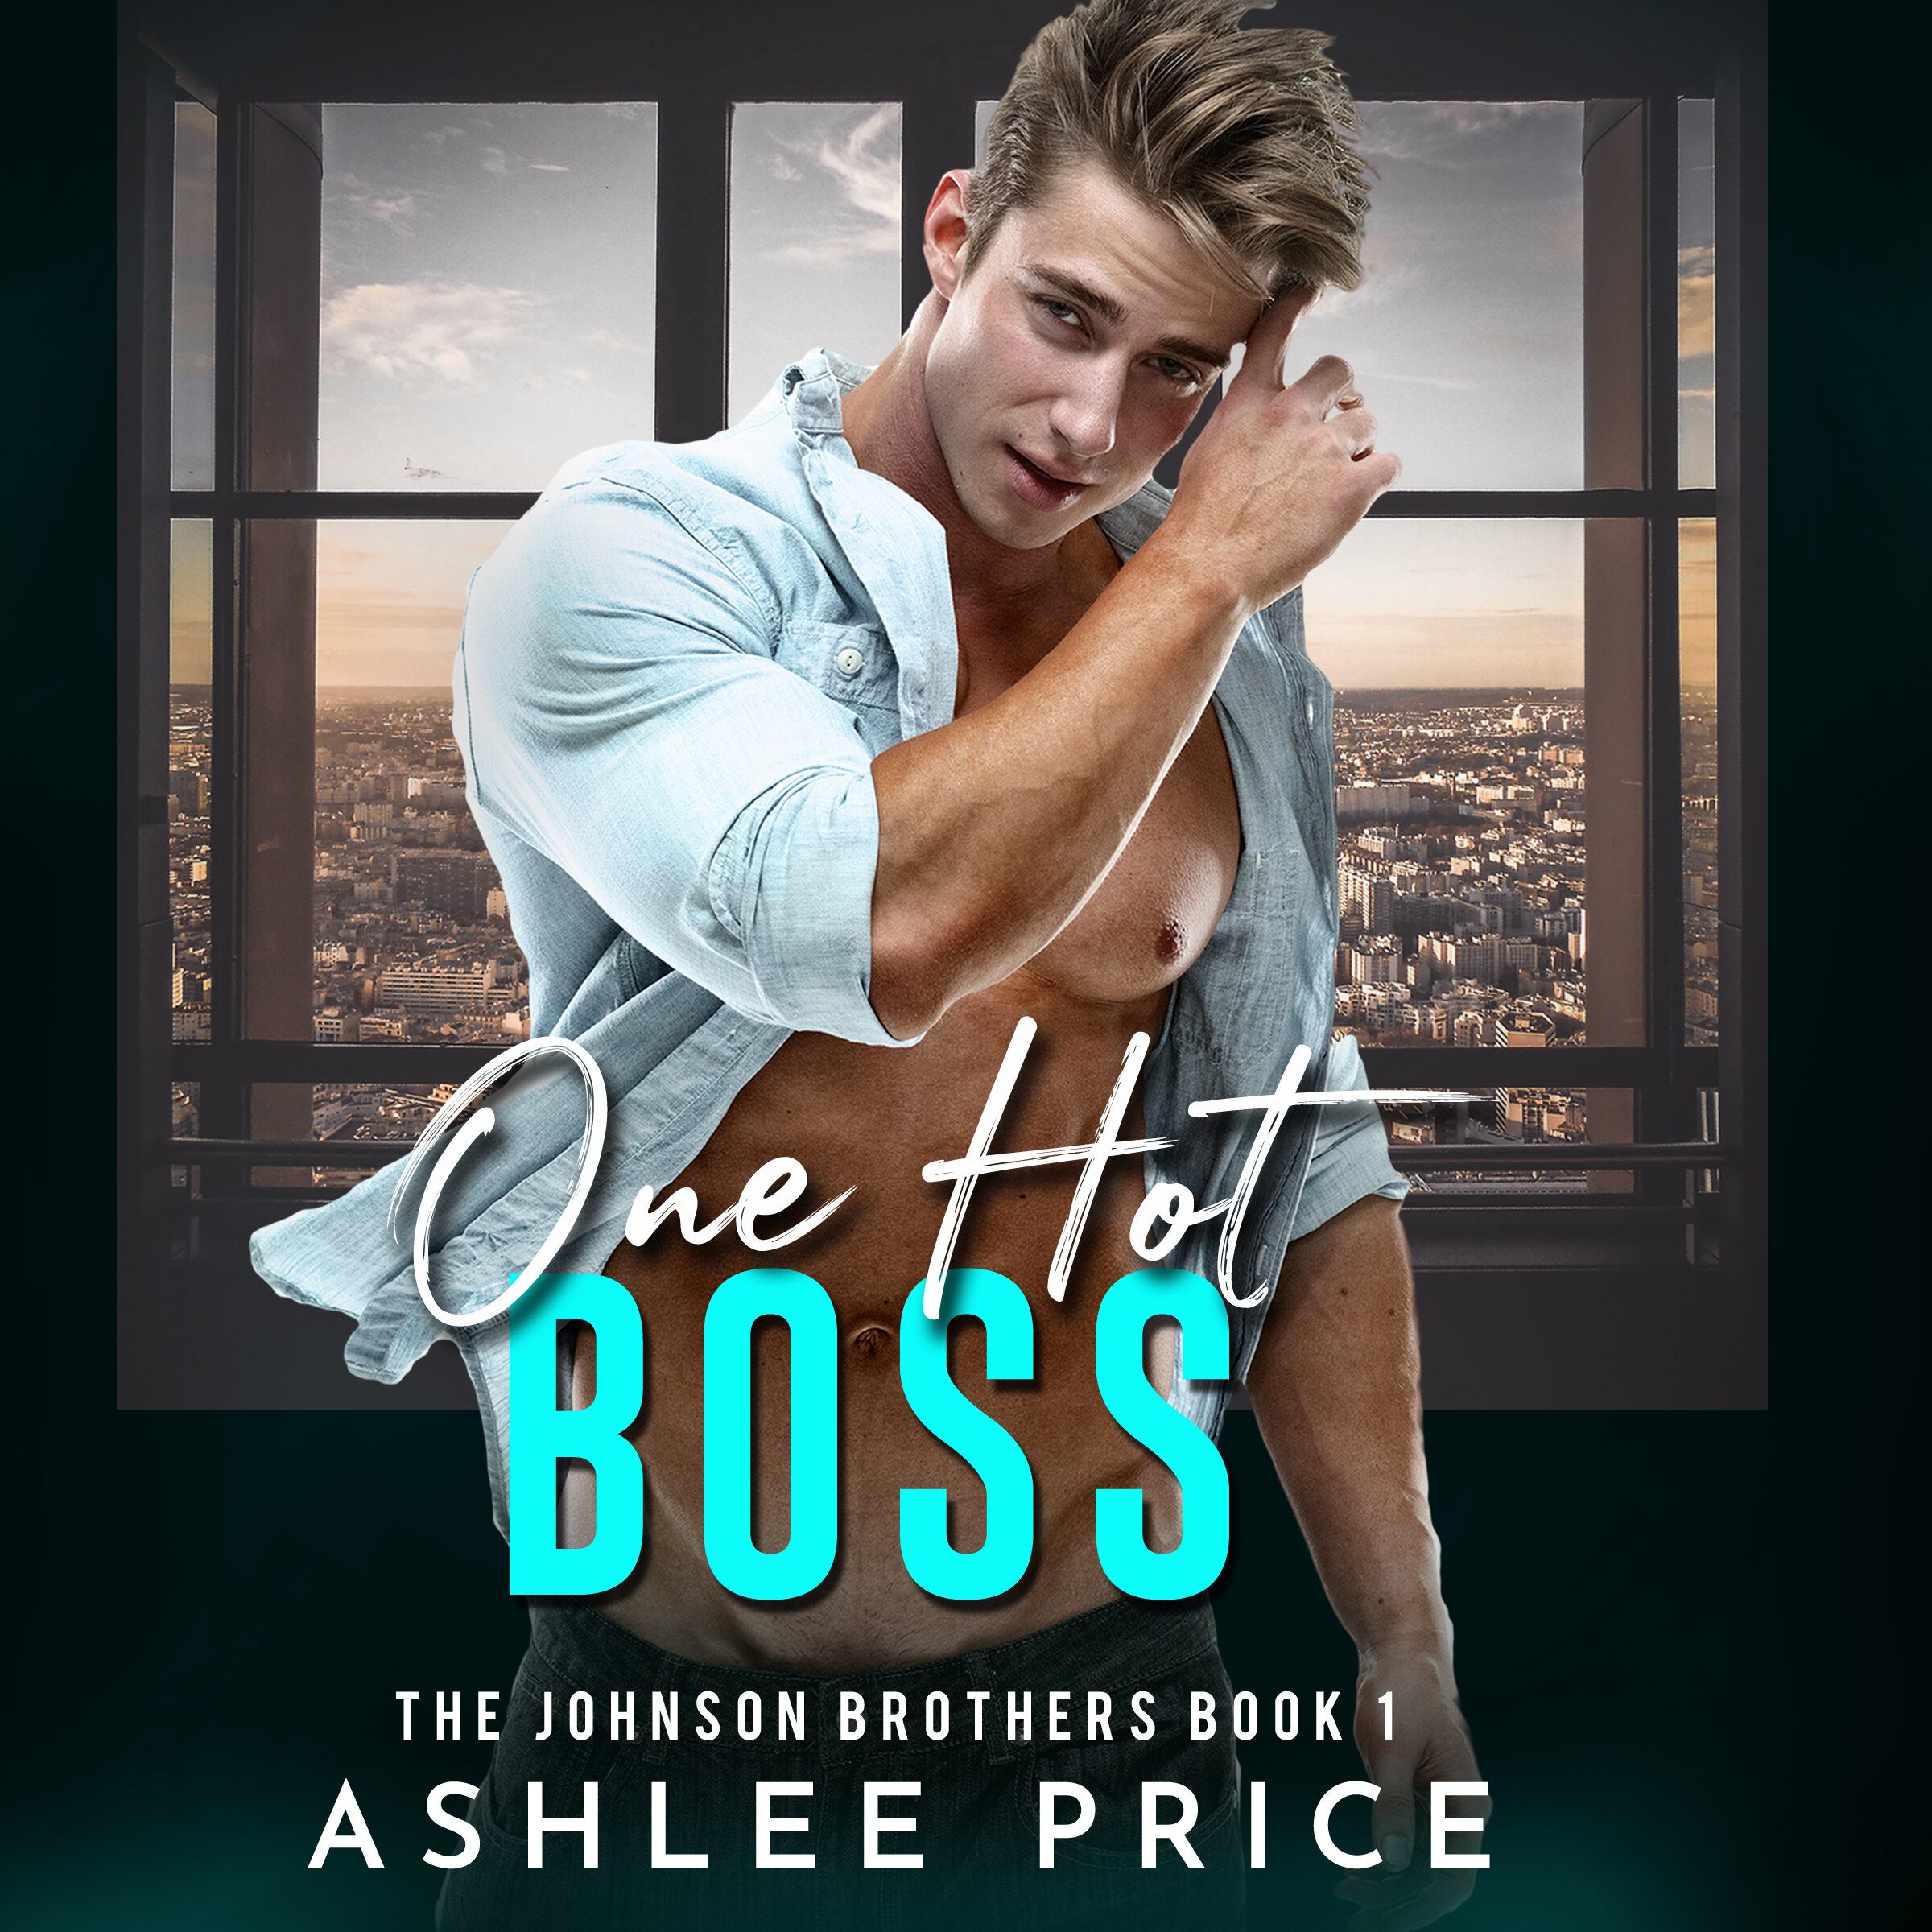 ???????????? One Hot Boss (The Johnson Brothers Book 1) is NOW LIVE! ????????????